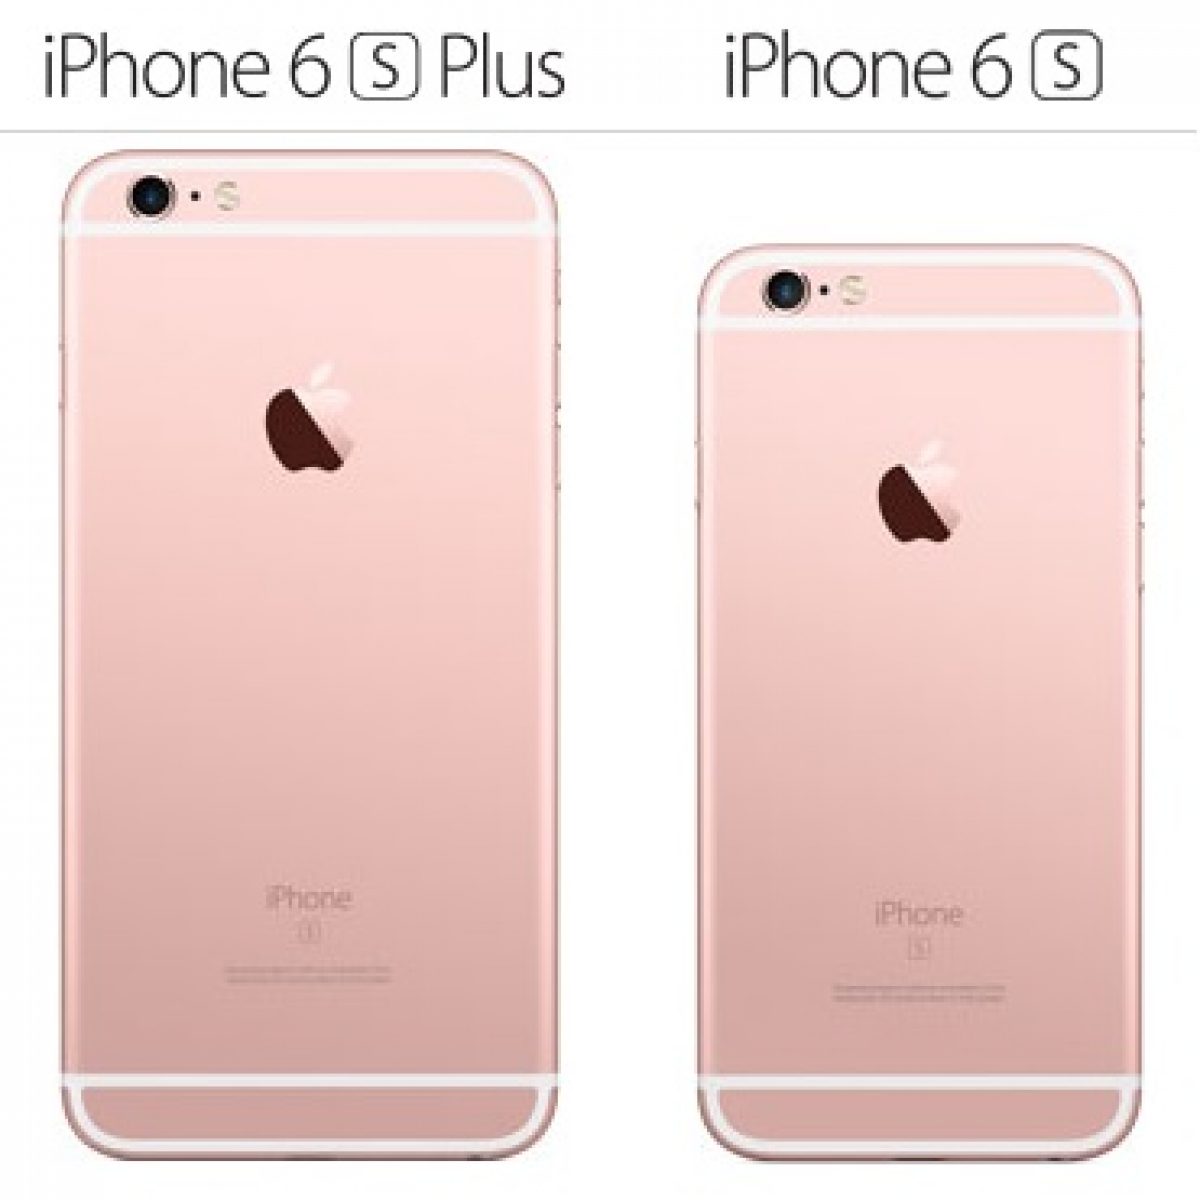 iPhone 6S iPhone 6S Plus? Pros and Cons!